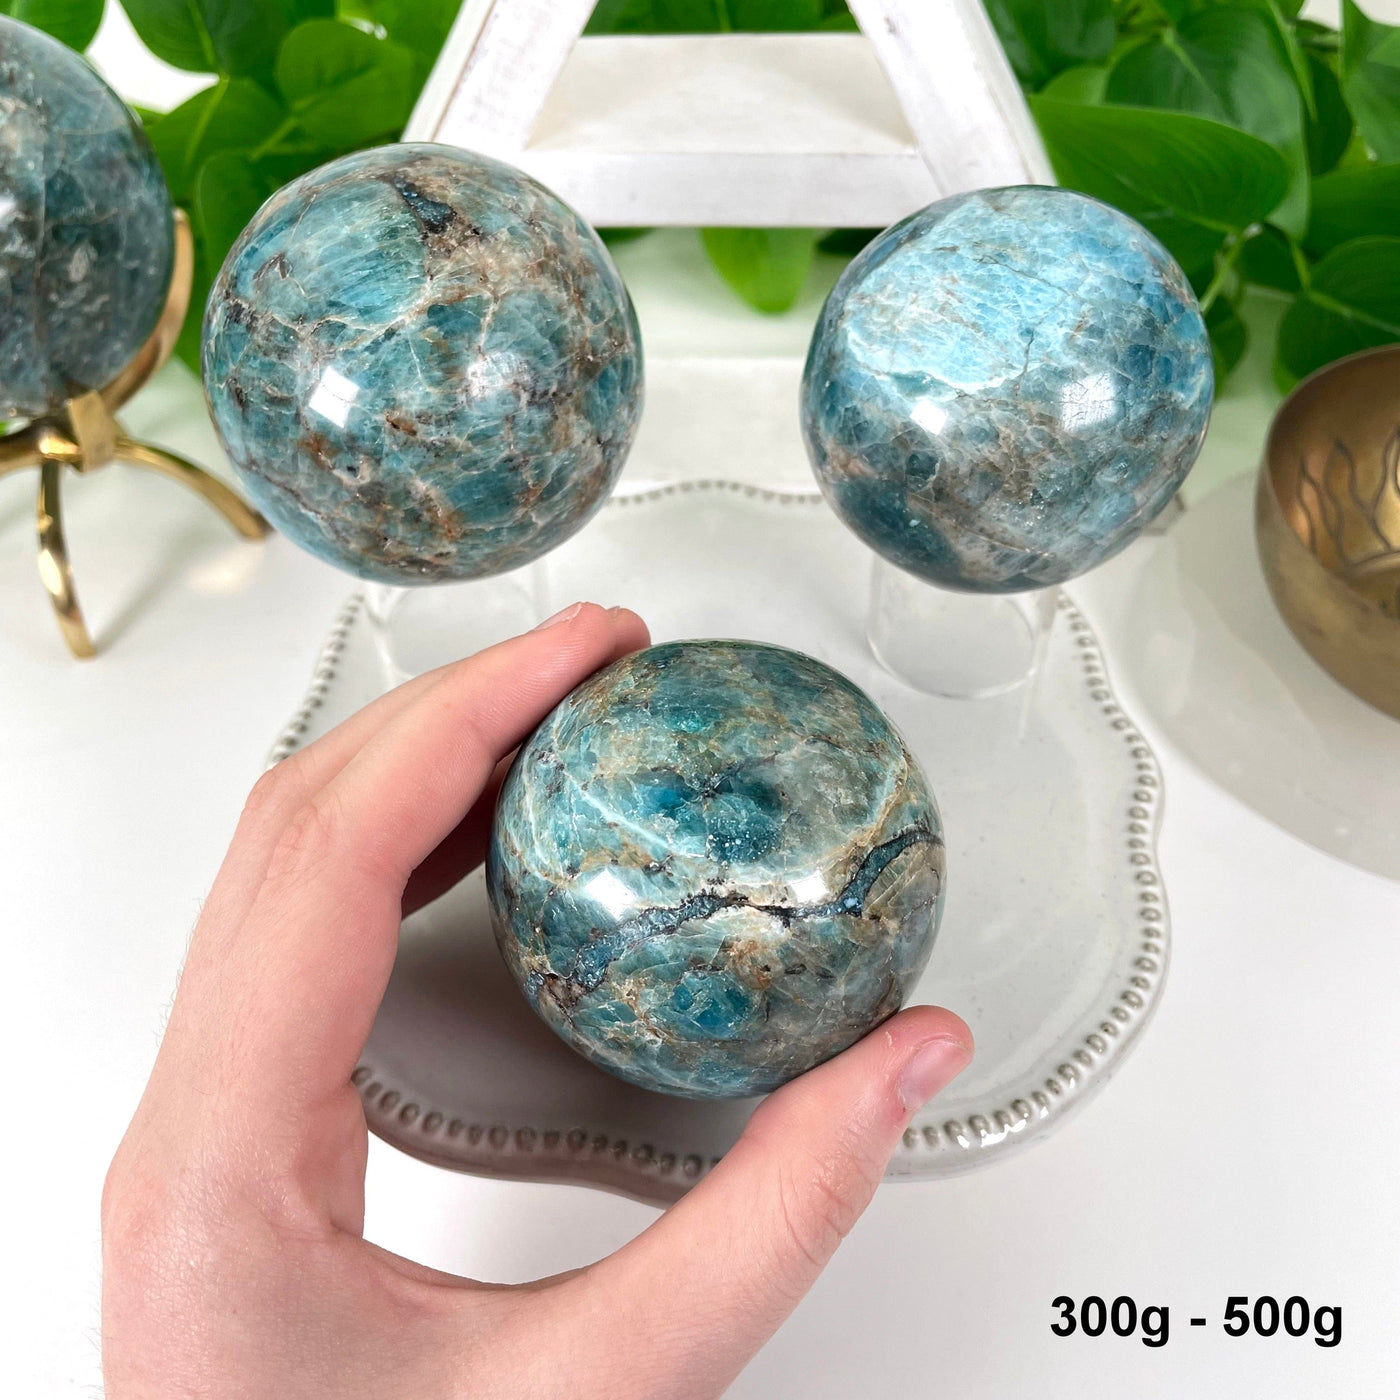 three 300g - 500g blue apatite polished spheres on display in front of backdrop for possible variations with one in hand for size reference